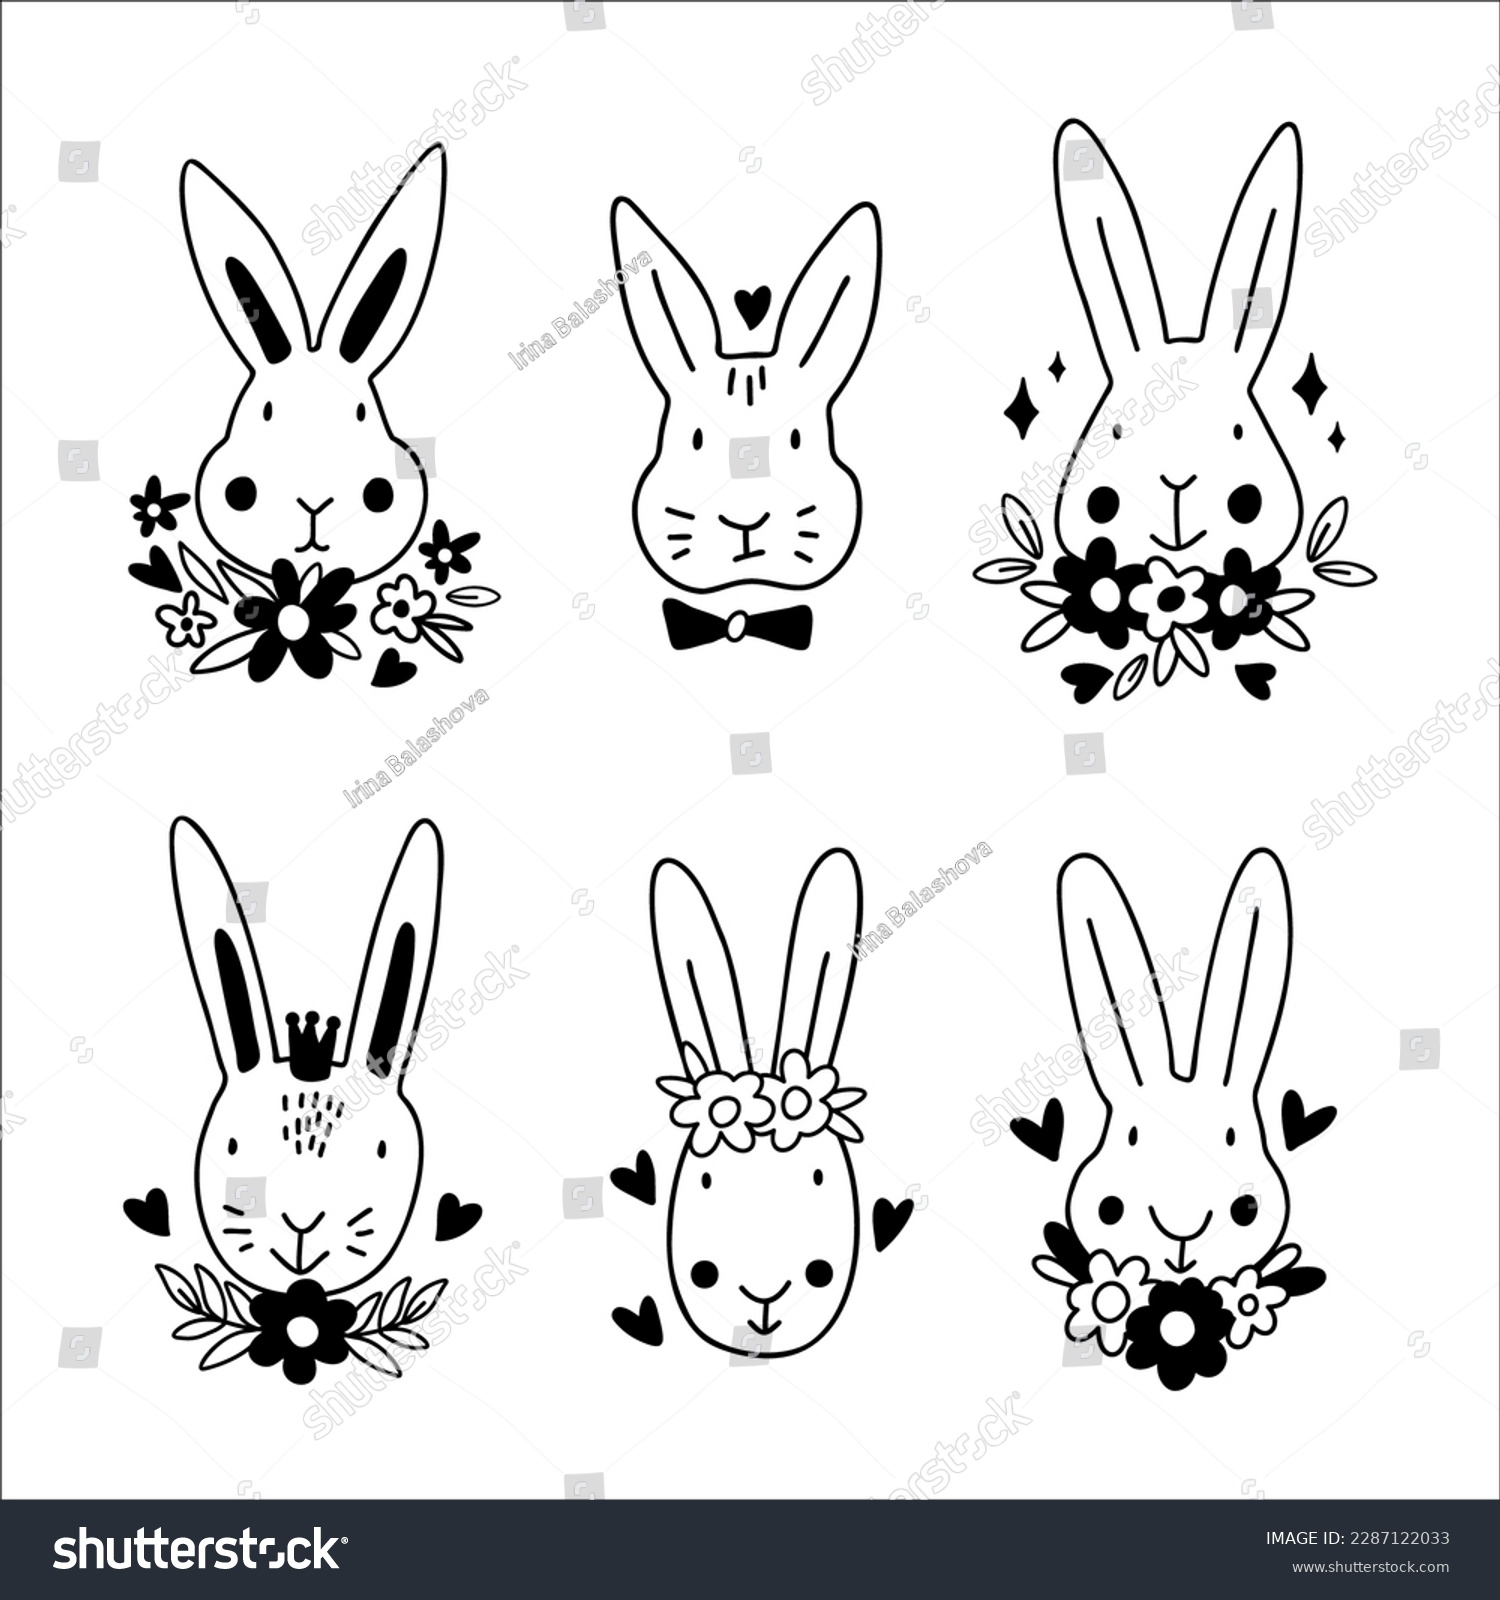 SVG of Cute Rabbit bunny SVG Cut File Design set for Cricut and Silhouette. svg